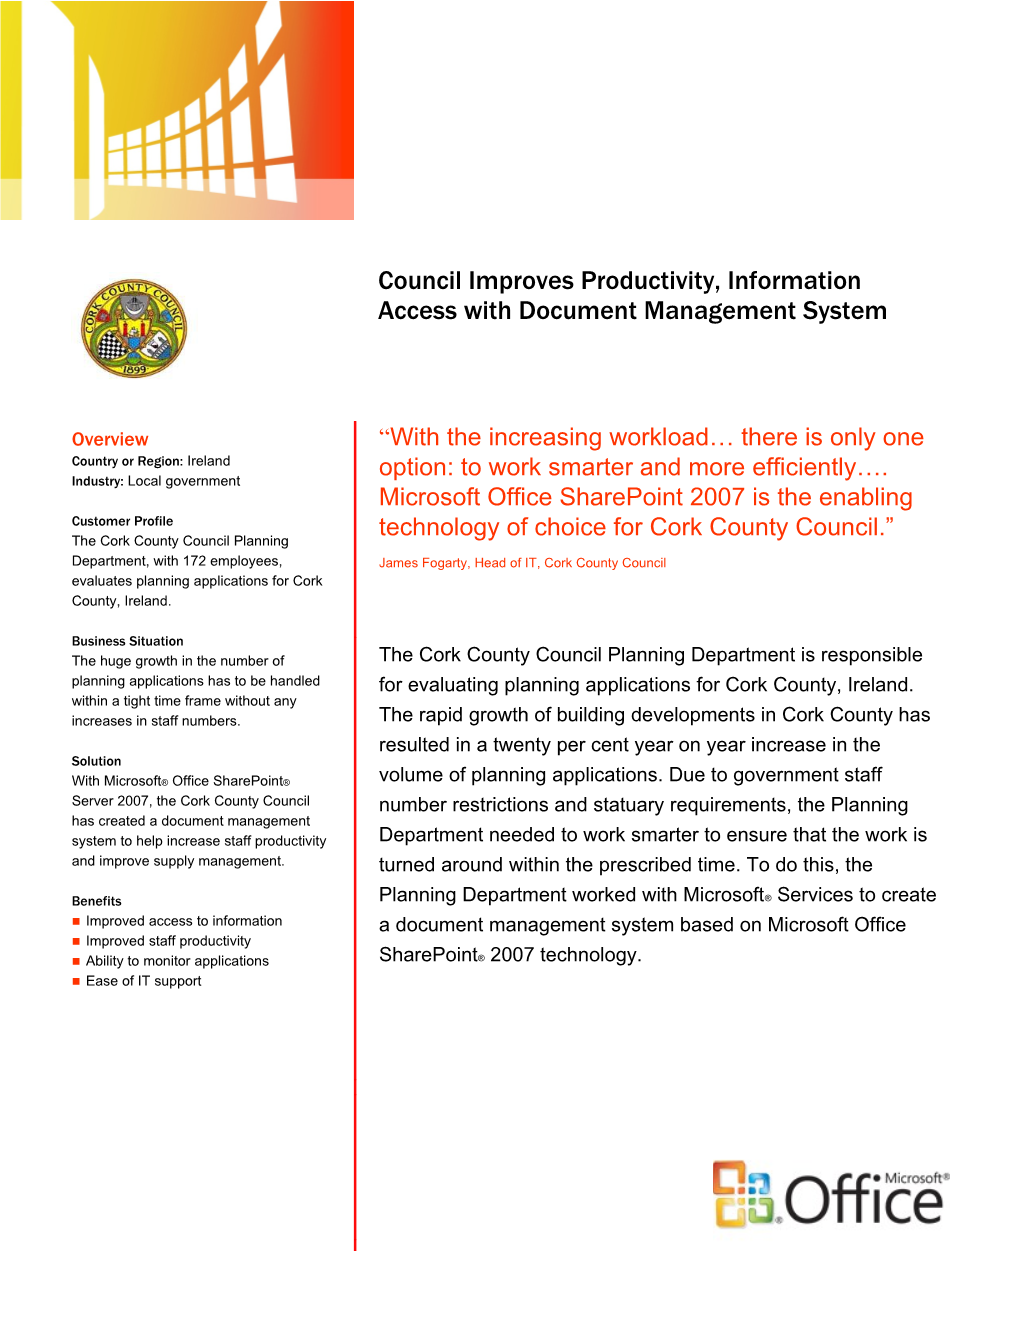 Council Improves Productivity, Information Access with Document Management System